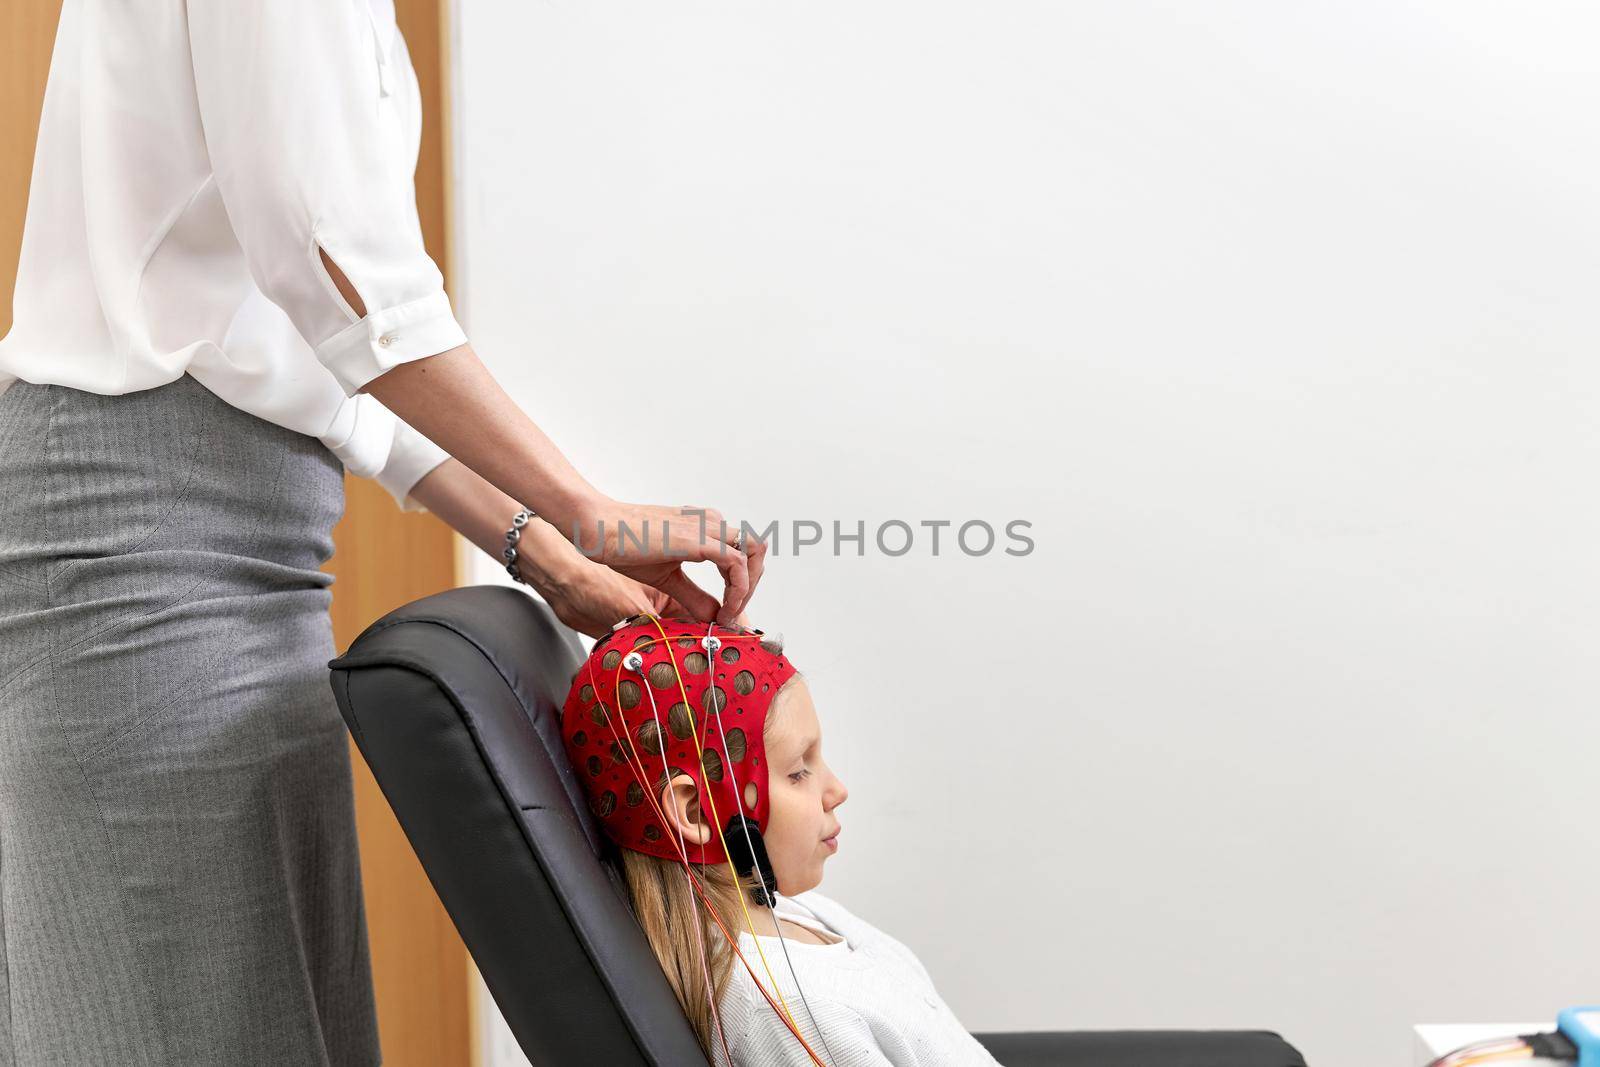 Profile of a doctor applying electrodes to a headgear of a patient during a biofeedback session